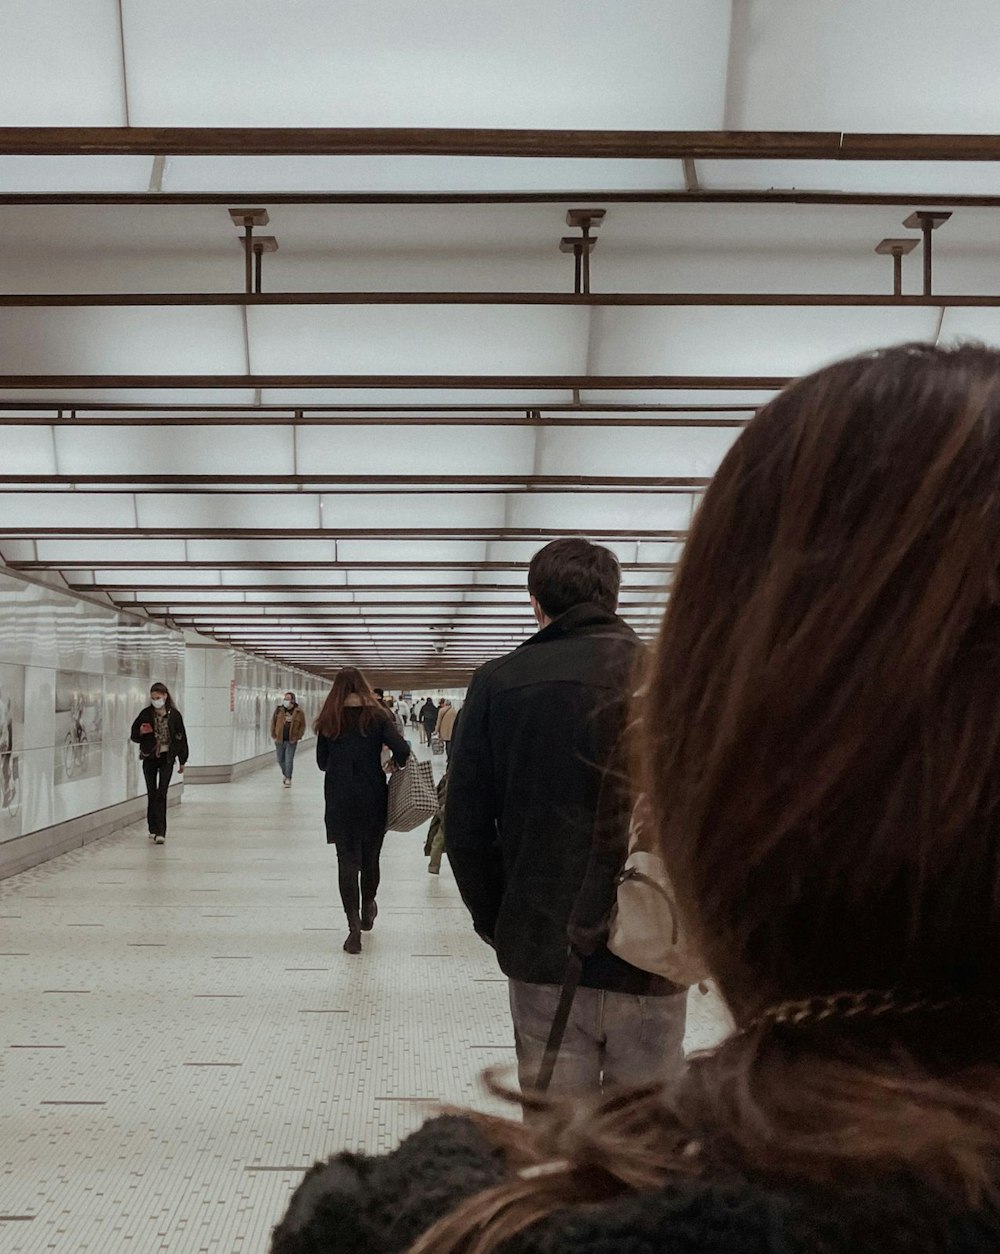 a group of people walking through a subway station